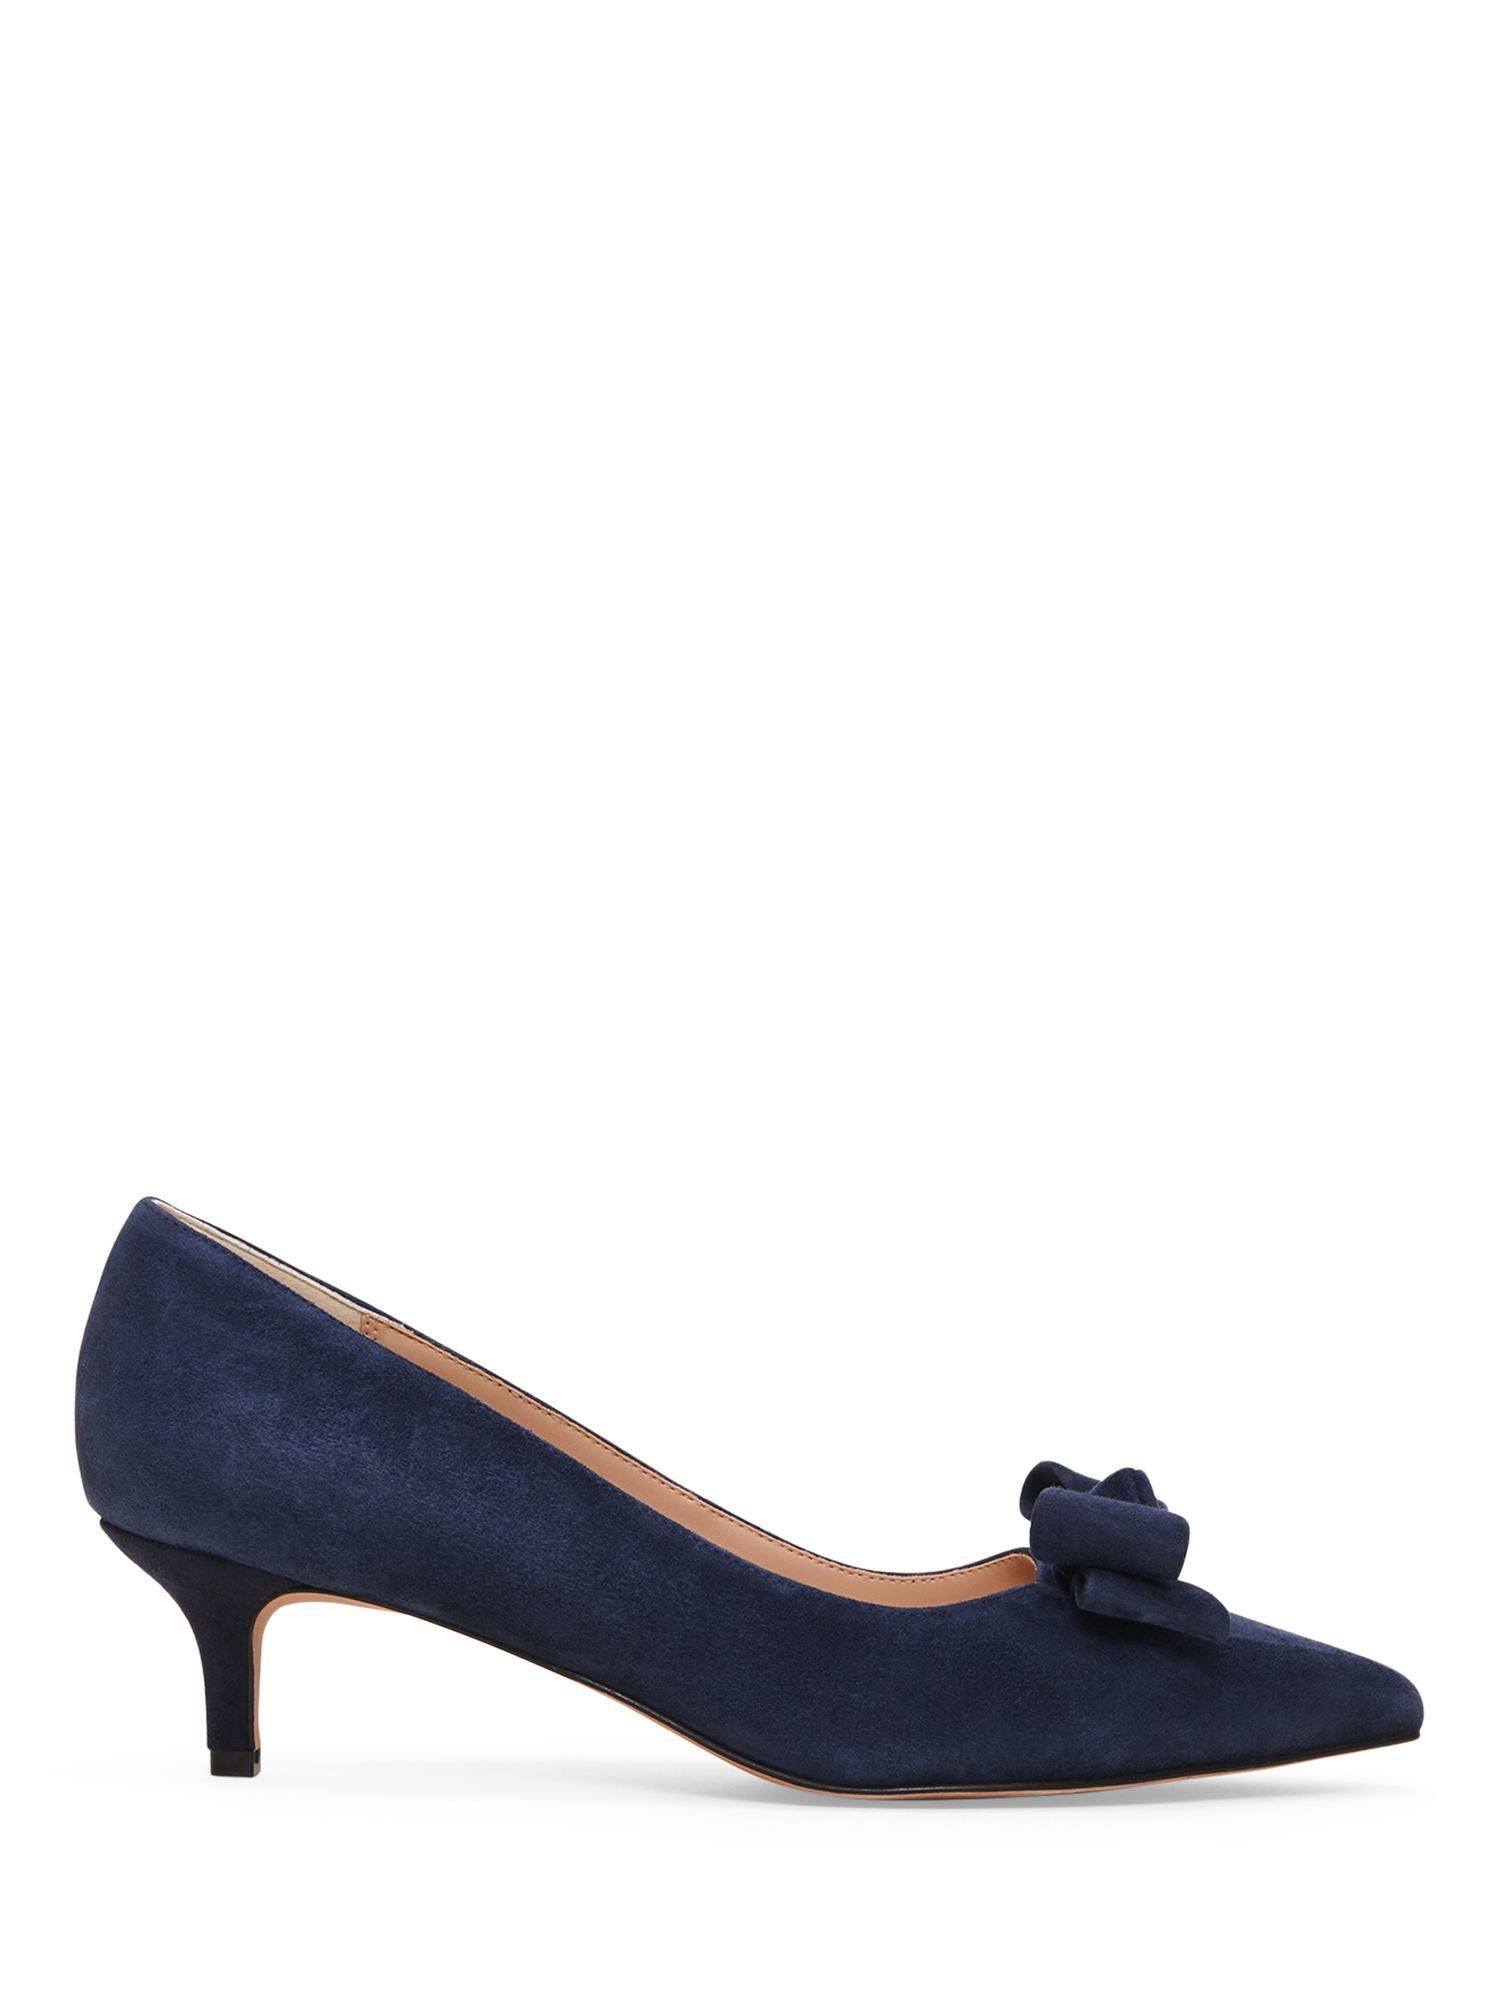 Phase Eight Structured Bow Kitten Heel Shoes, Navy at John Lewis & Partners